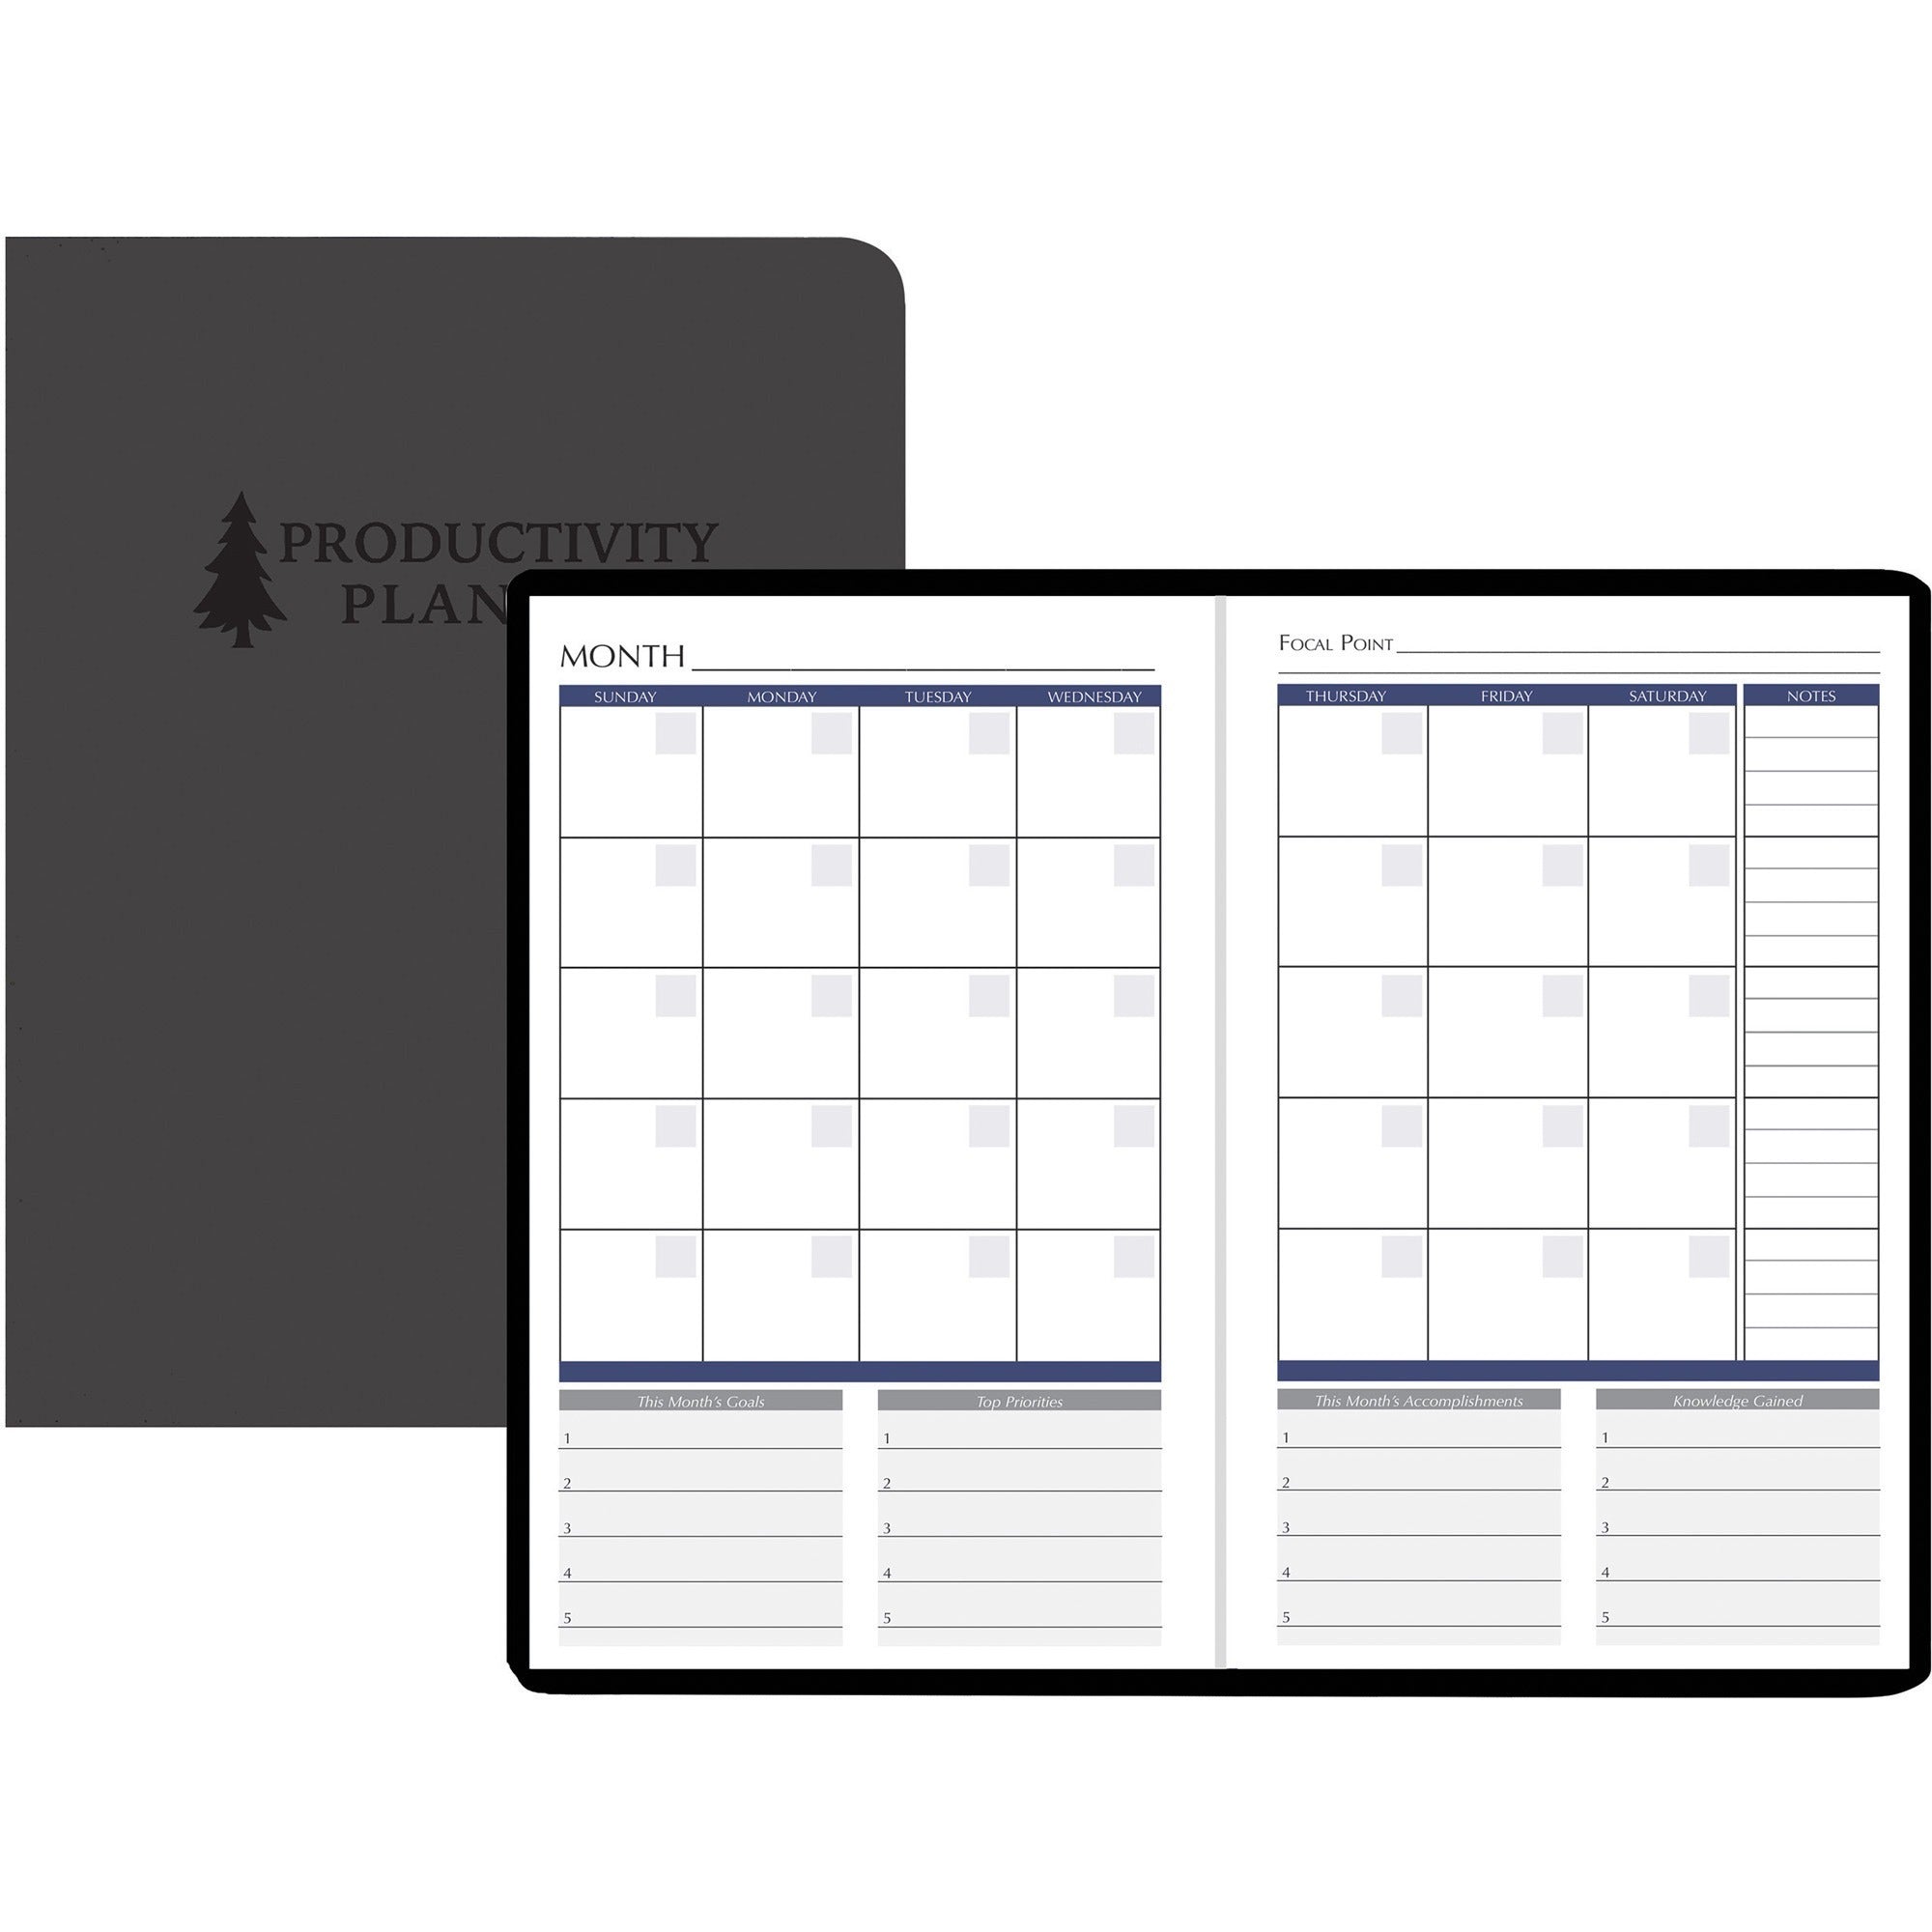 house-of-doolittle-non-dated-productivity-planner-monthly-weekly-12-month-1-month-1-day-1-week-double-page-layout-blue-sheet-gray-suede-gray-cover-93-height-x-63-width-embossed-pocket-daily-schedule-task-list-to-do-list_hod59799 - 1